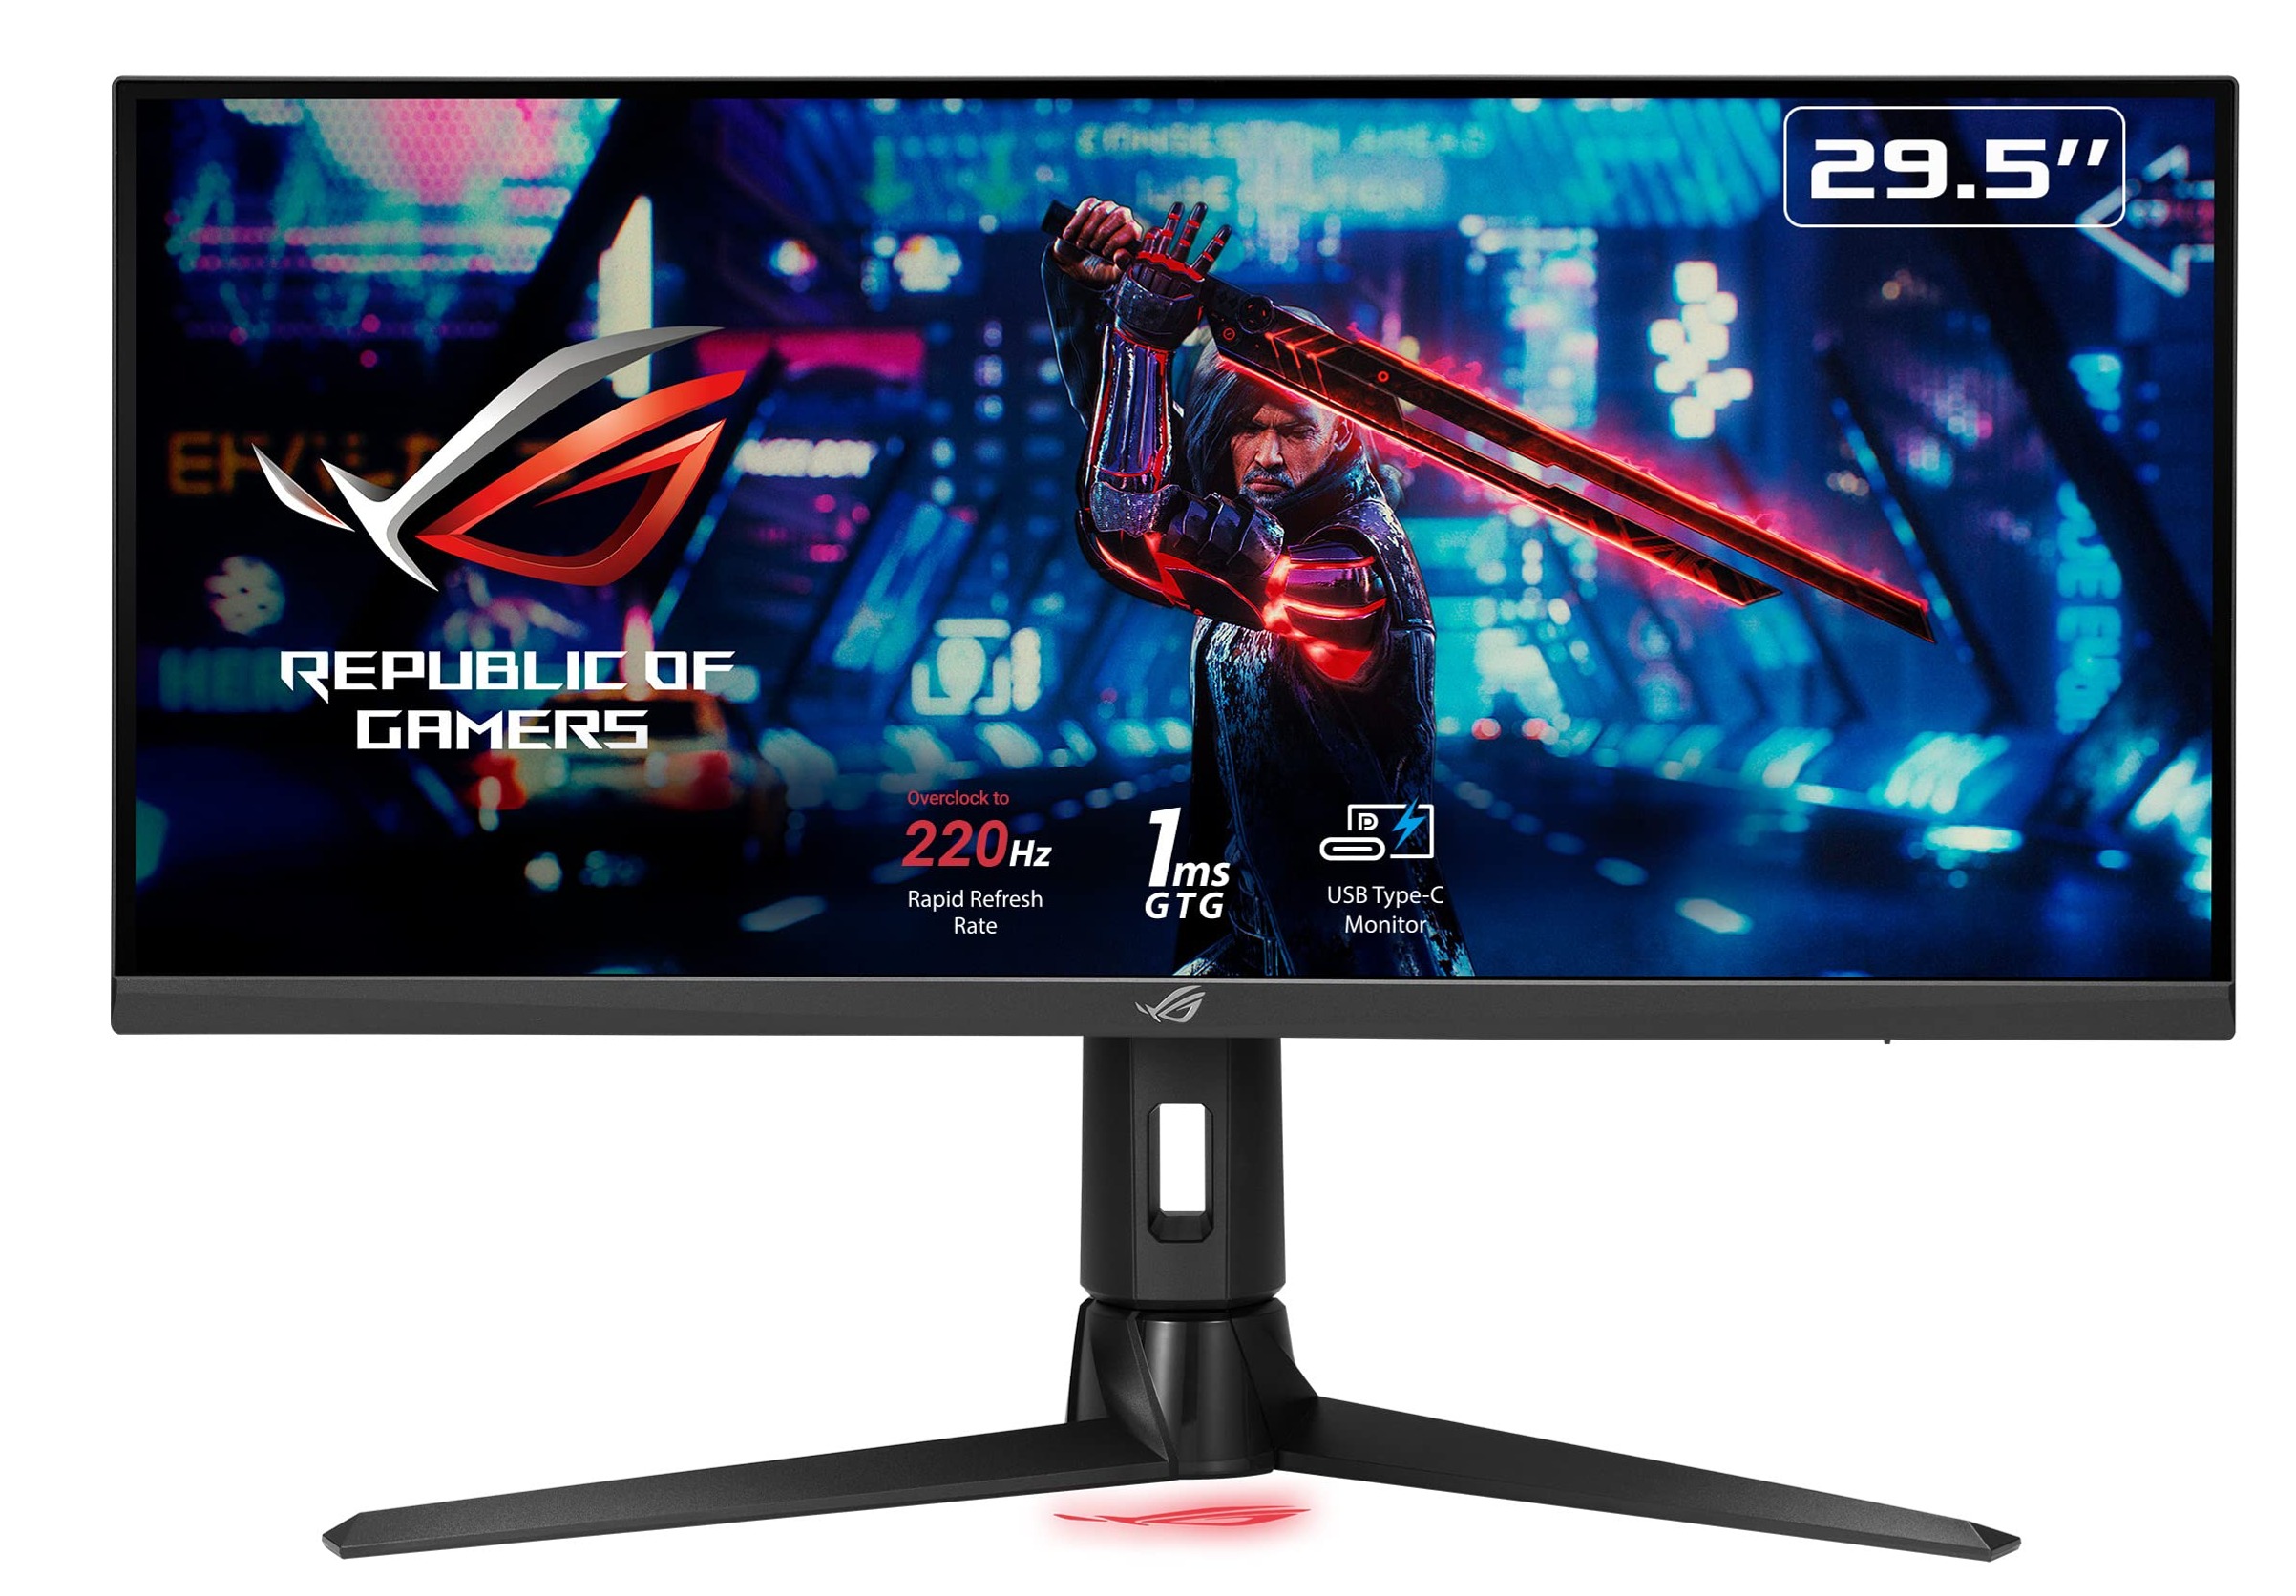 ASUS ROG Strix 29.5” 21:9 HDR Gaming -Monitor(XG309CM) - WFHD (2560 x 1080), Fast IPS, 220Hz, 1ms, Low Motion Blur Sync, G-SYNC Compatible, FOR $219.99